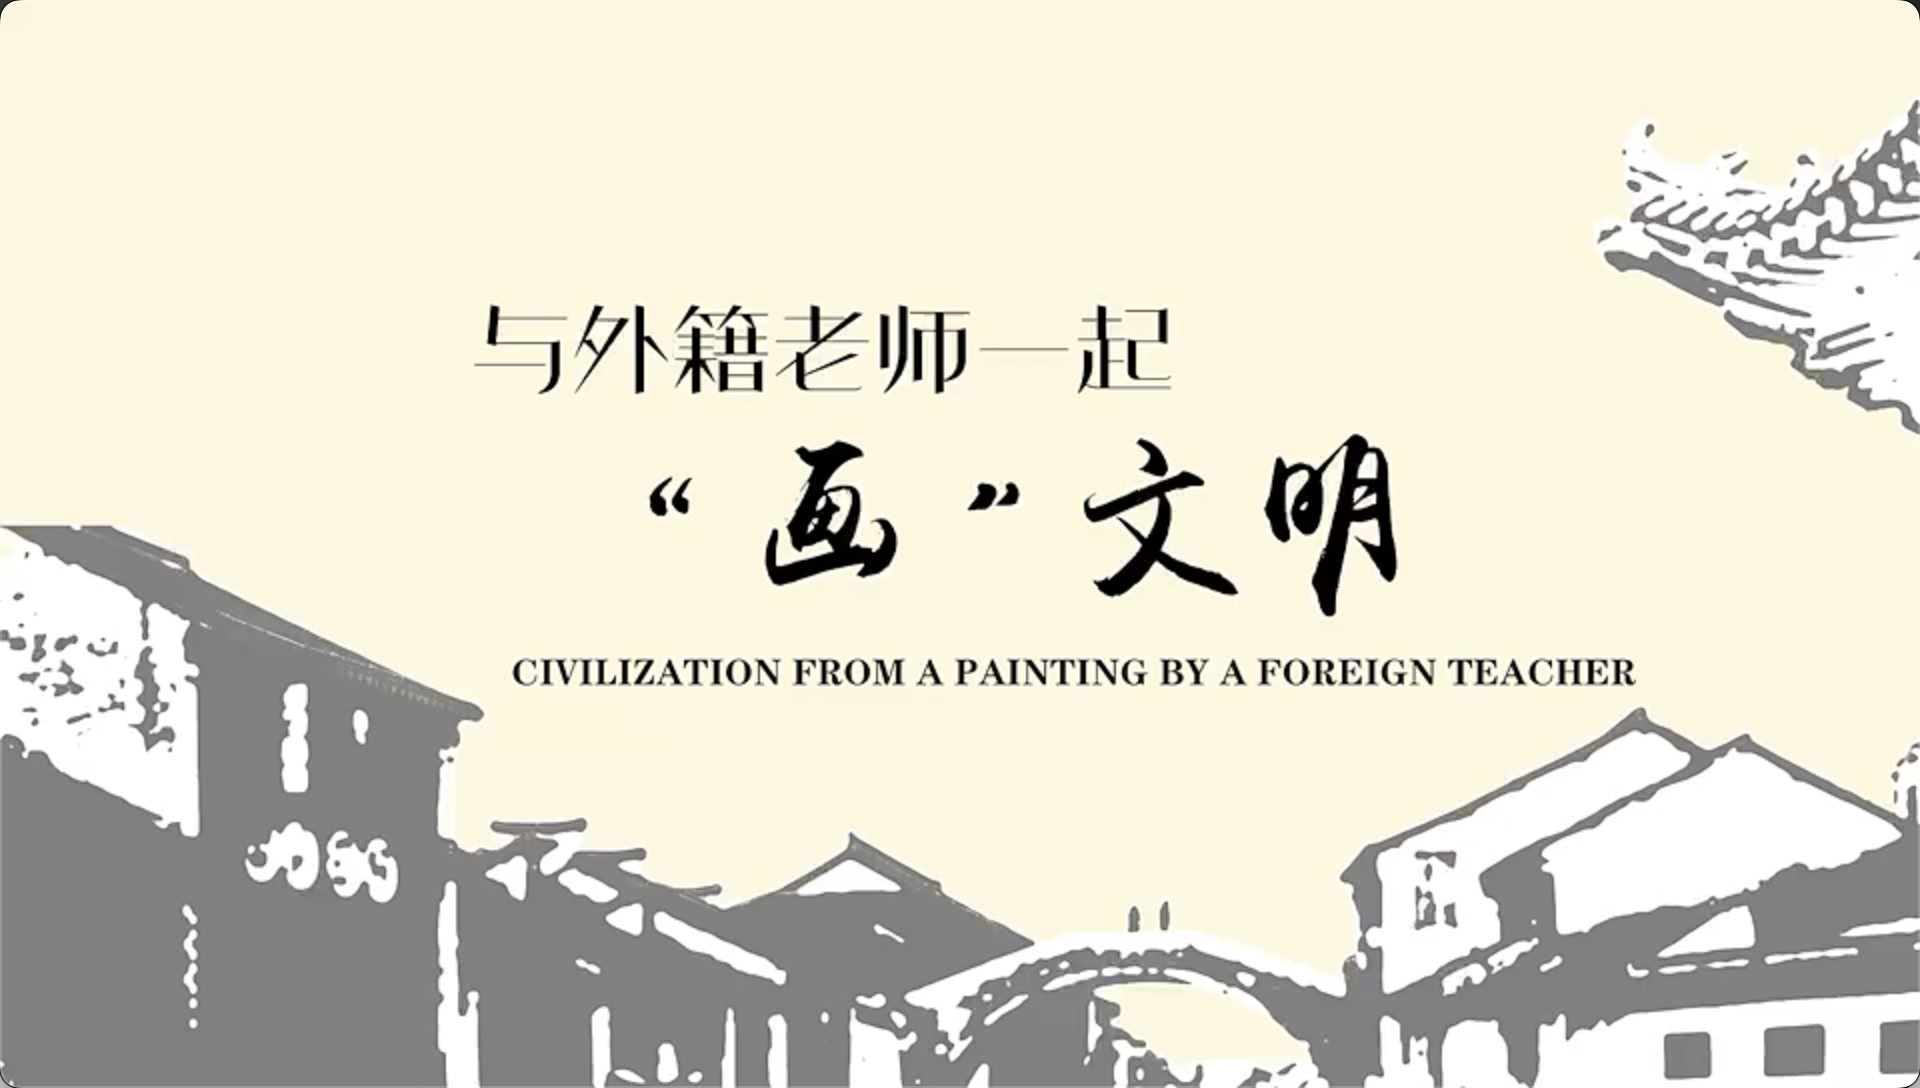 Civilization from a painting by a foreign teacher